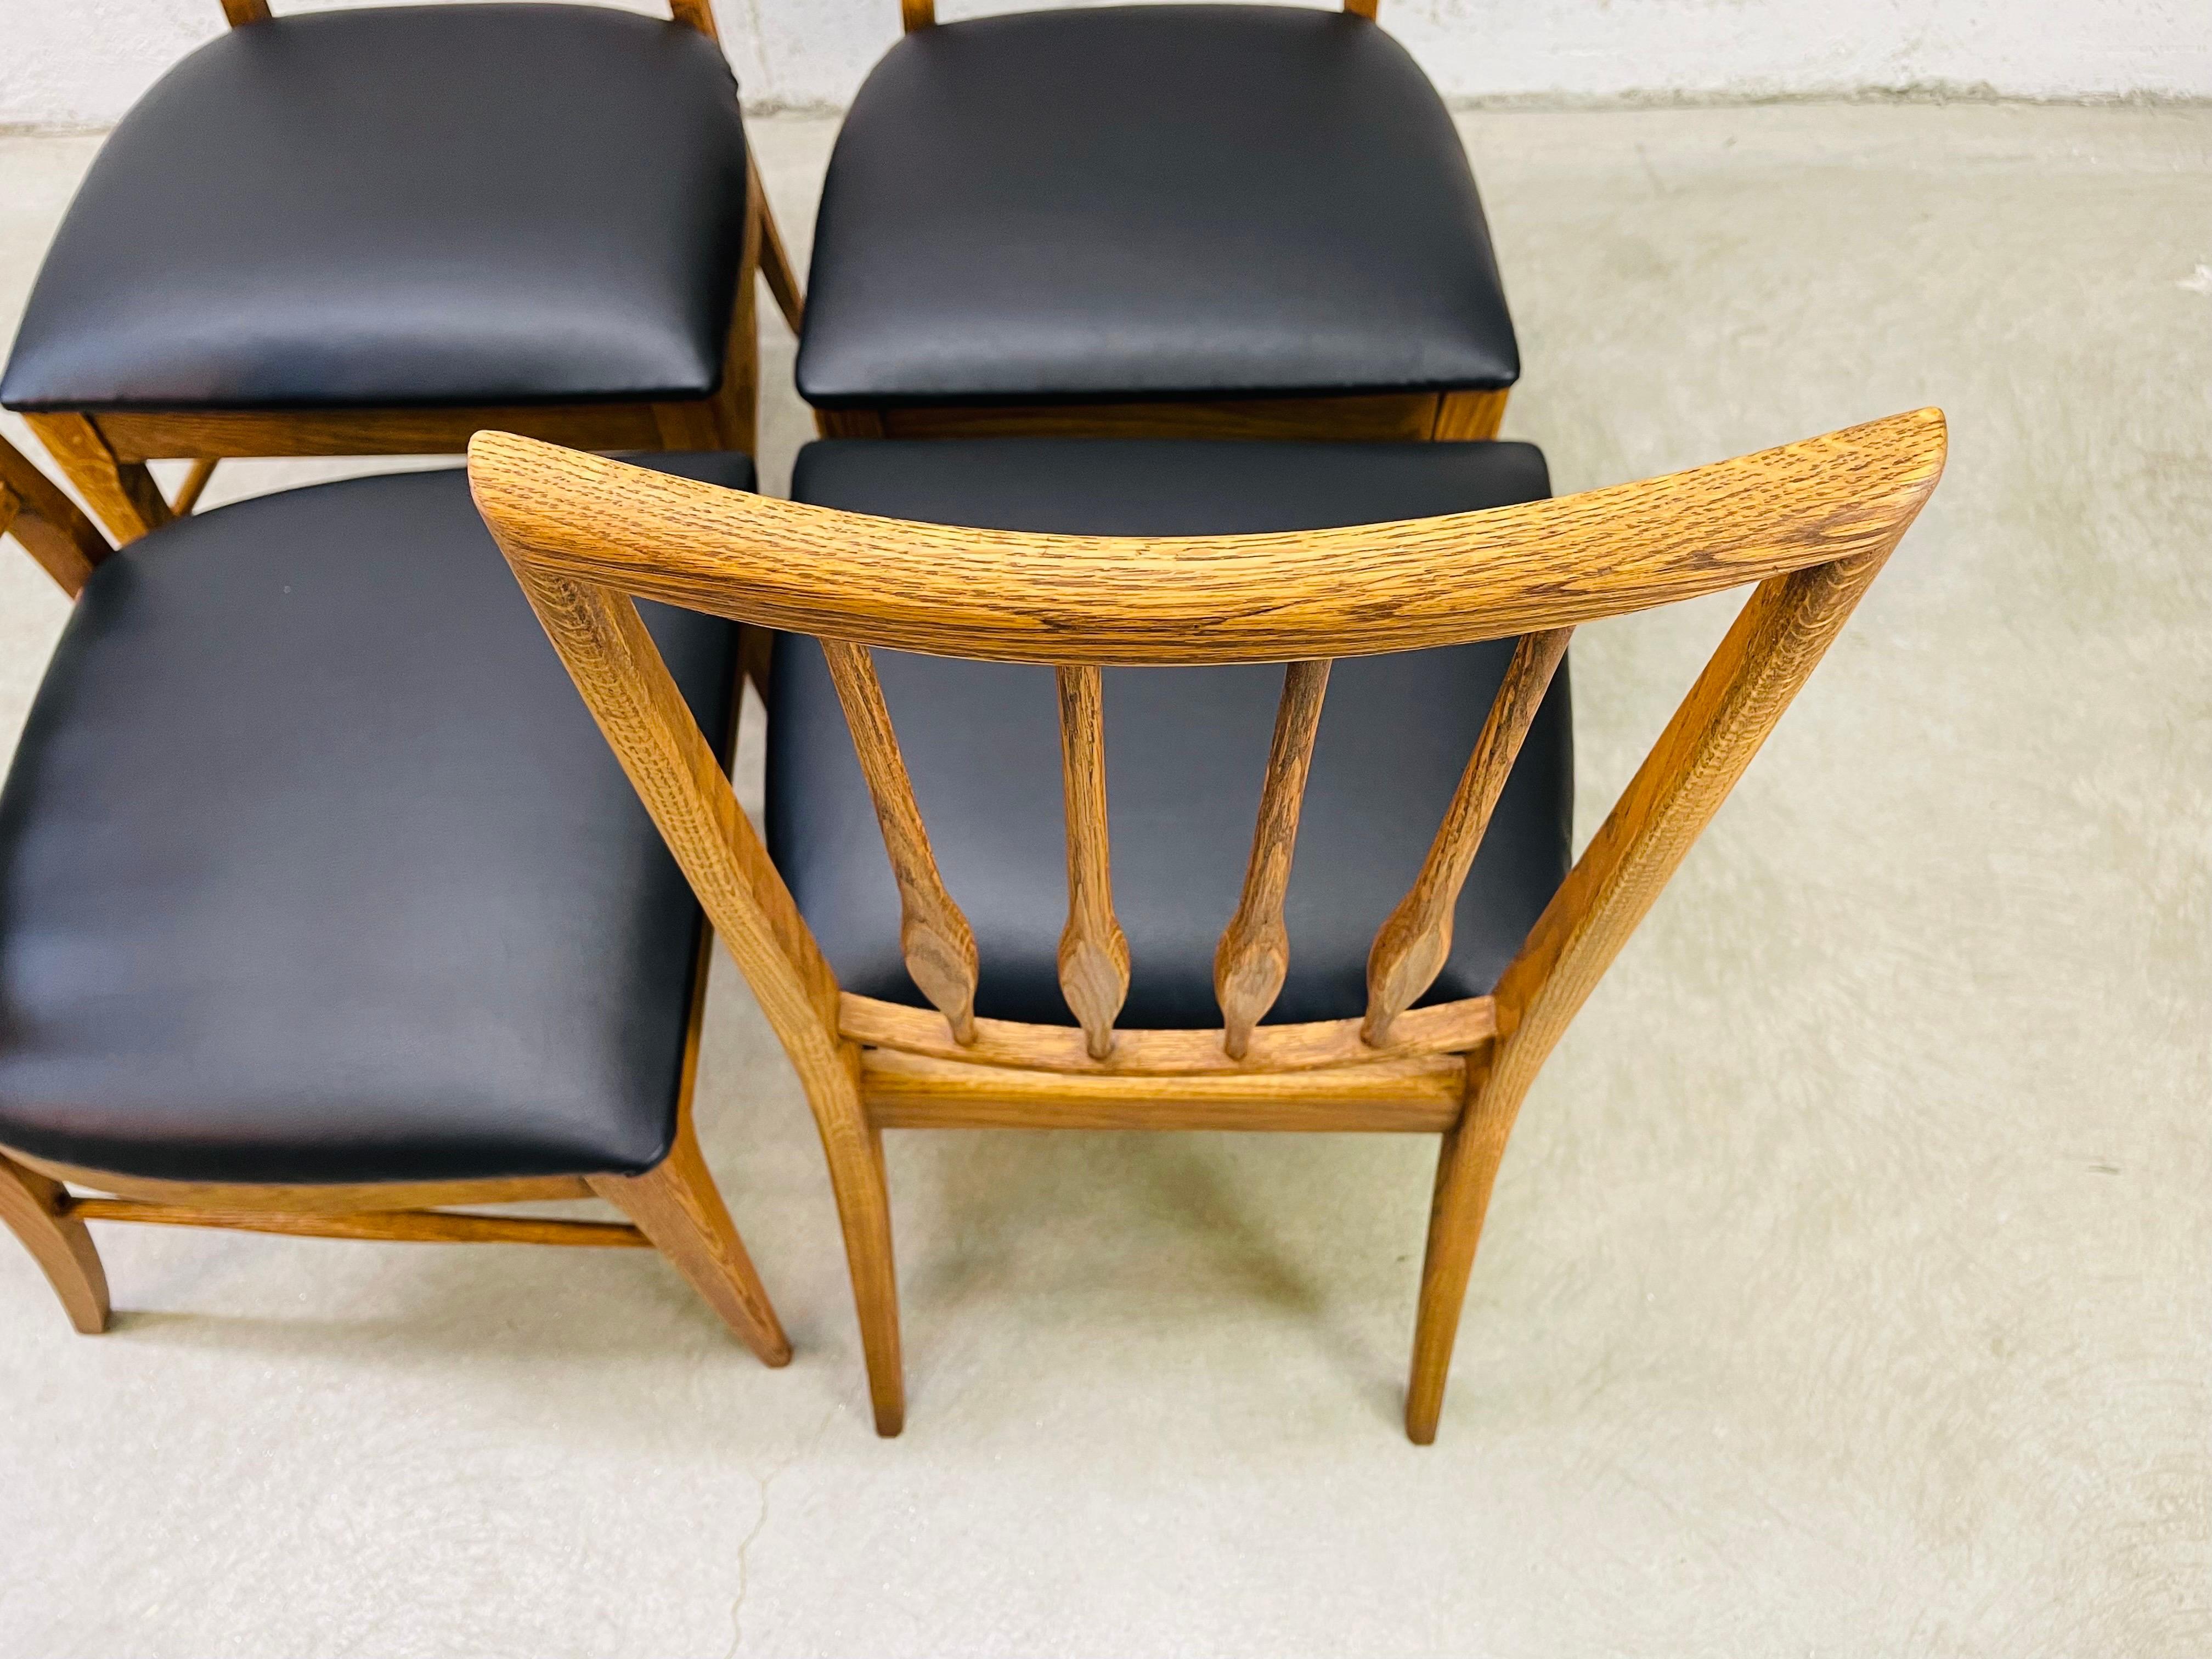 Naugahyde 1960s High-Back Dining Chairs, Set of 4 For Sale